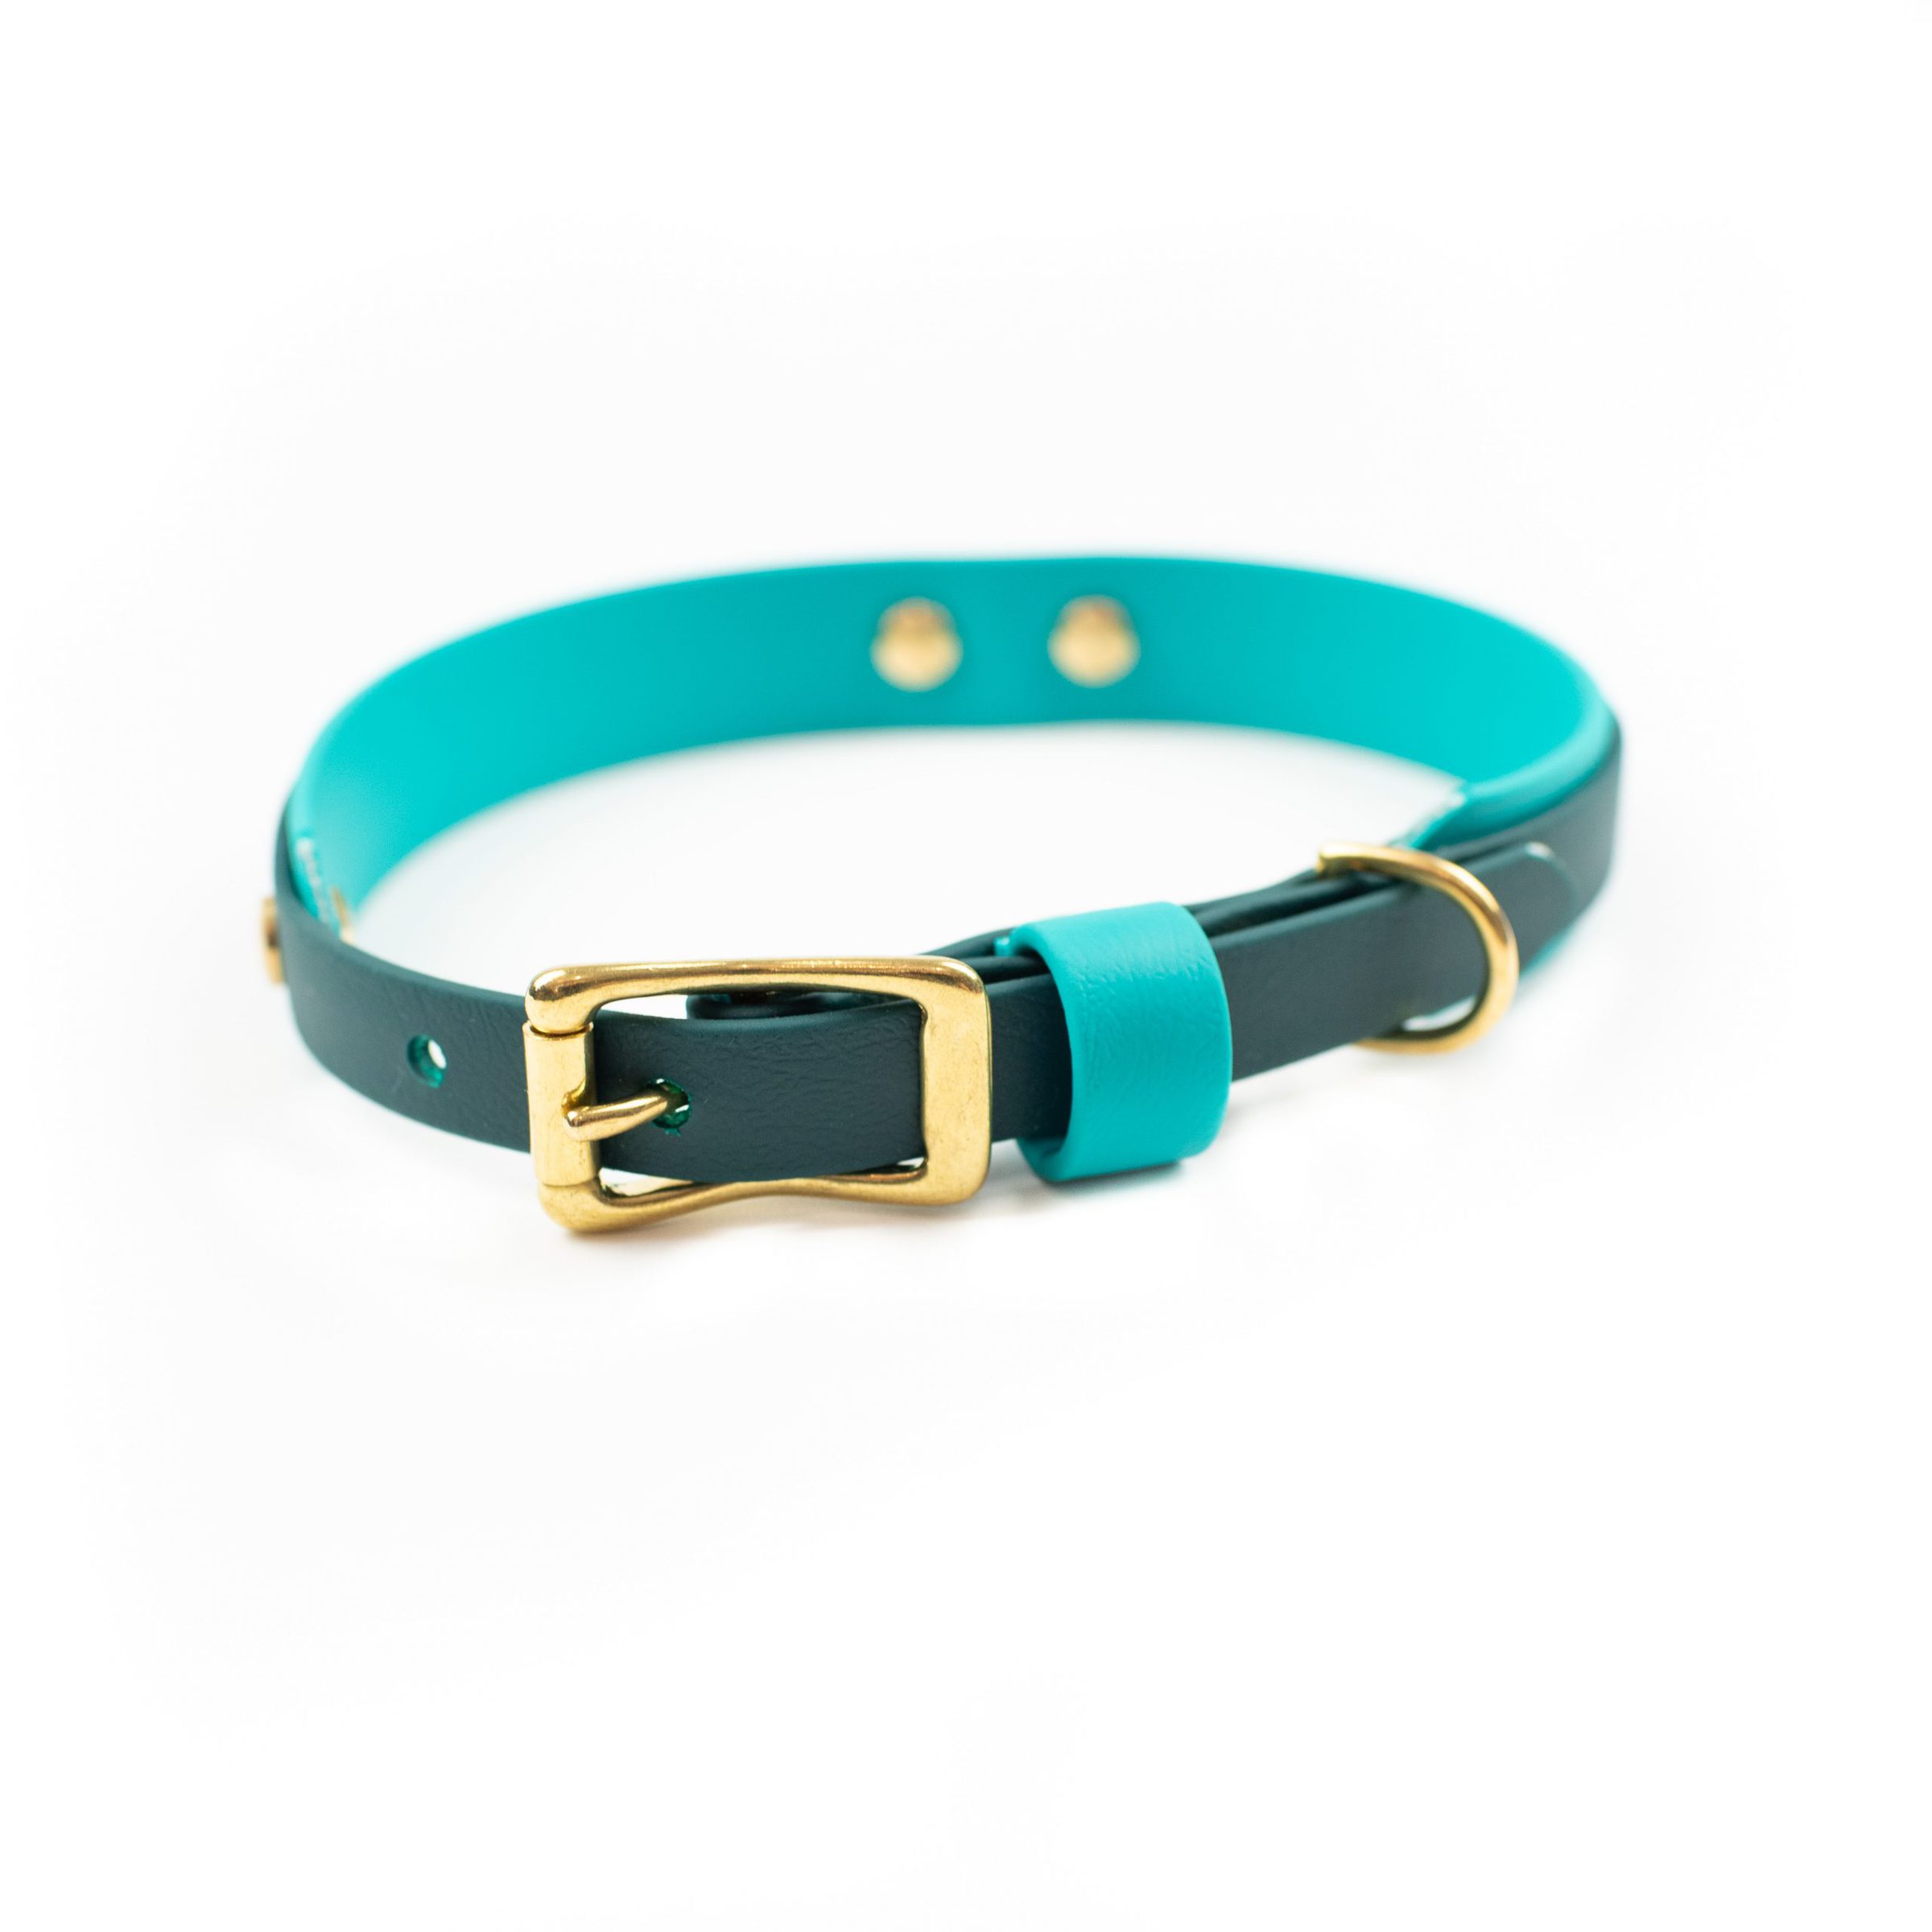 Multilayer biothane dog collar in teal and green